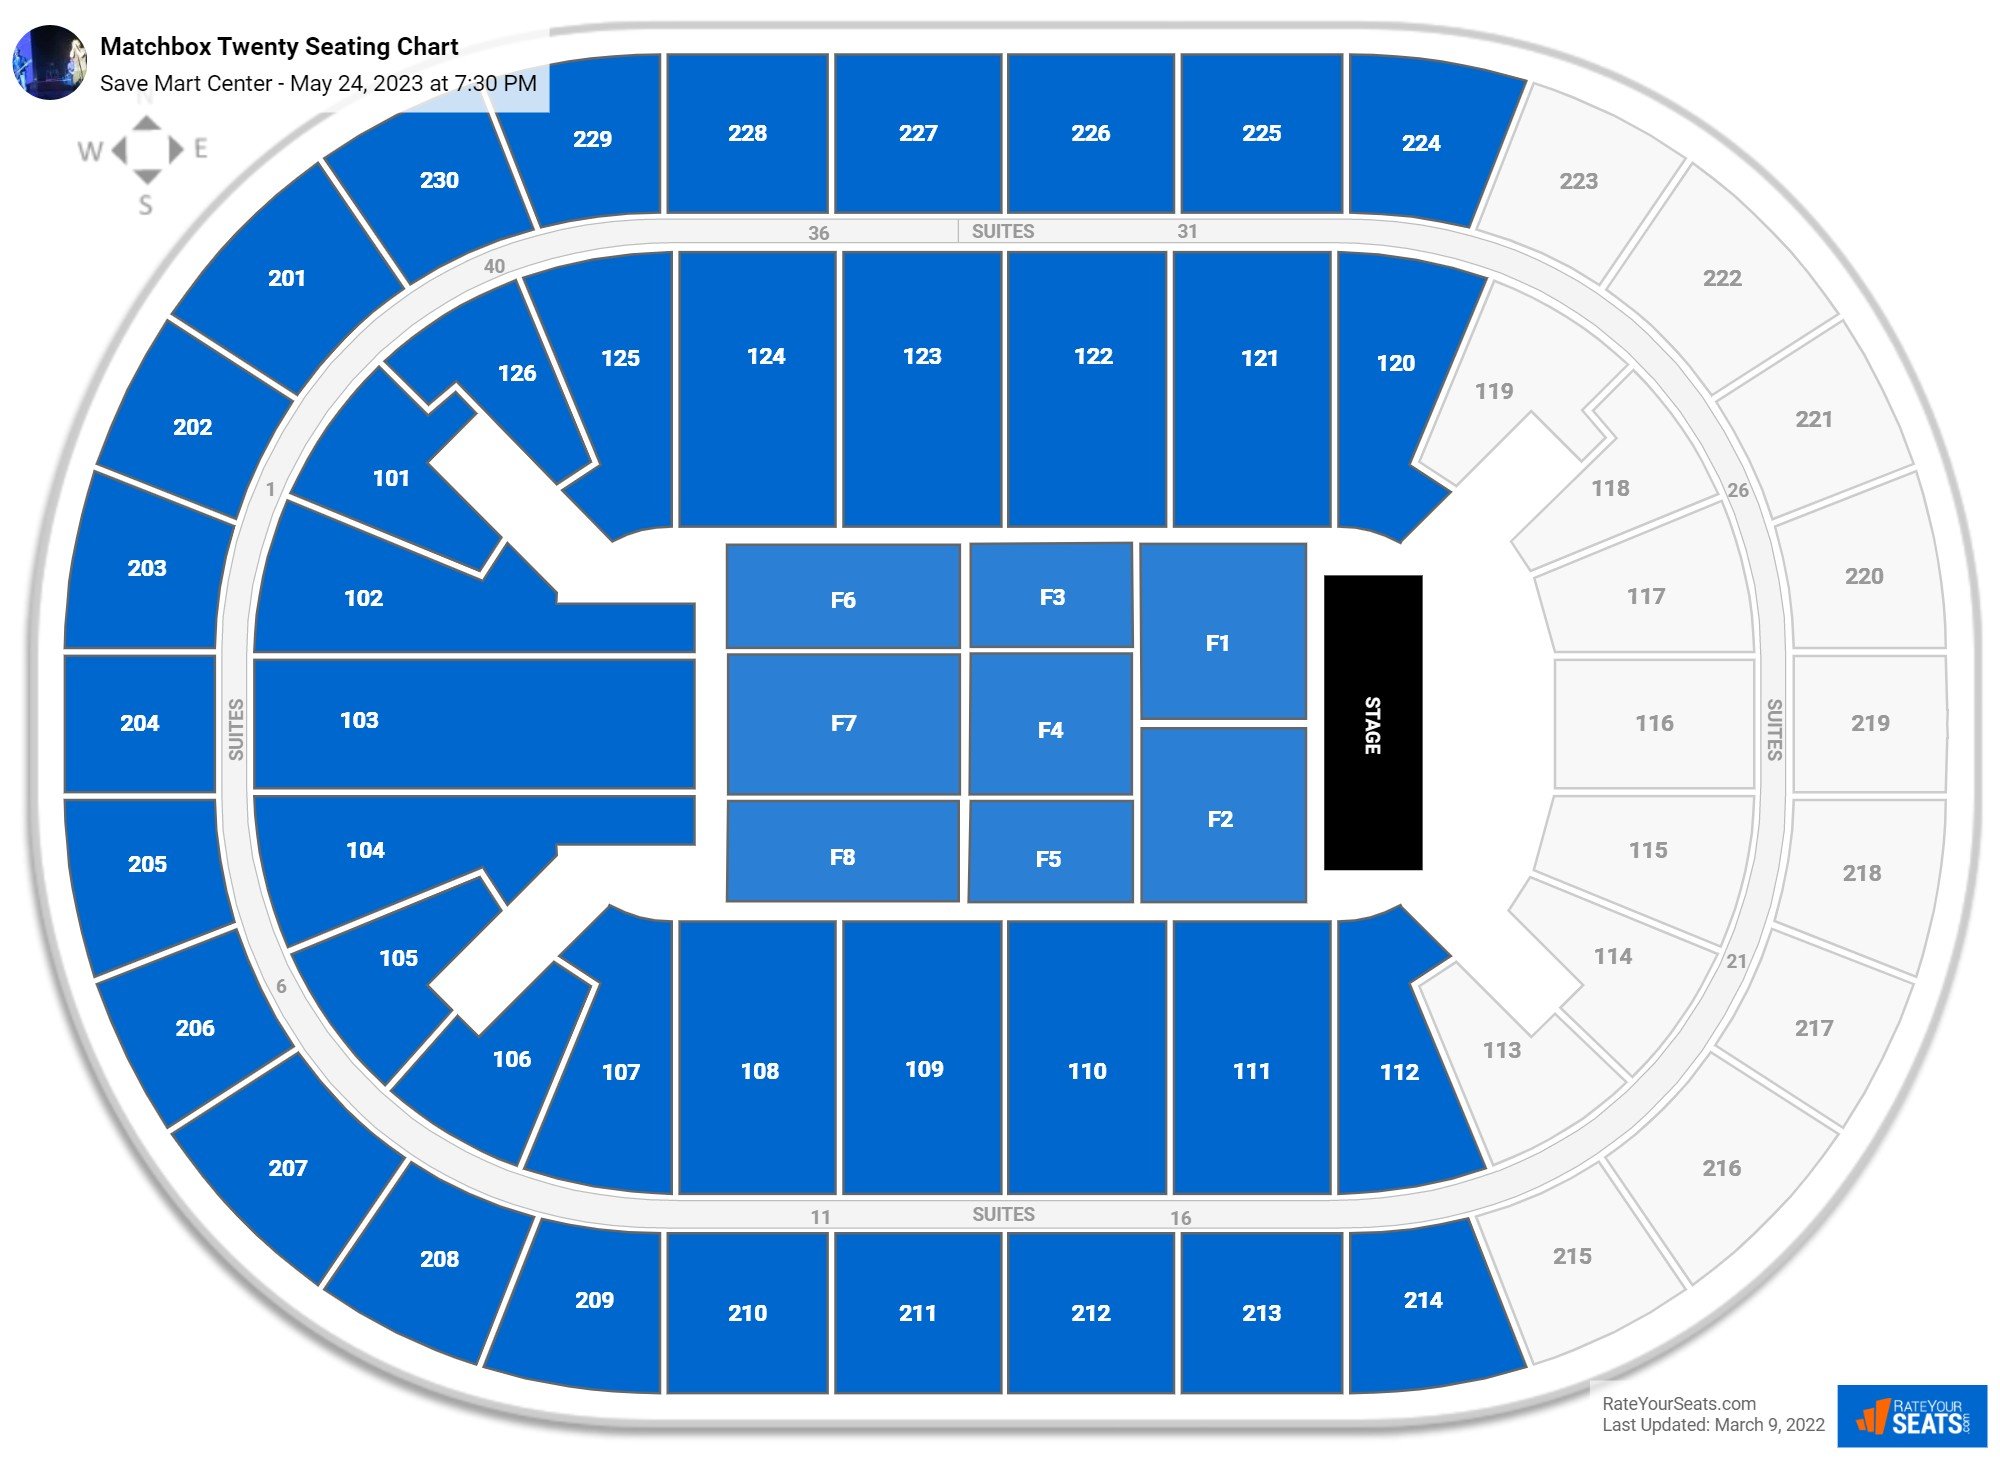 save-mart-center-seating-chart-rateyourseats